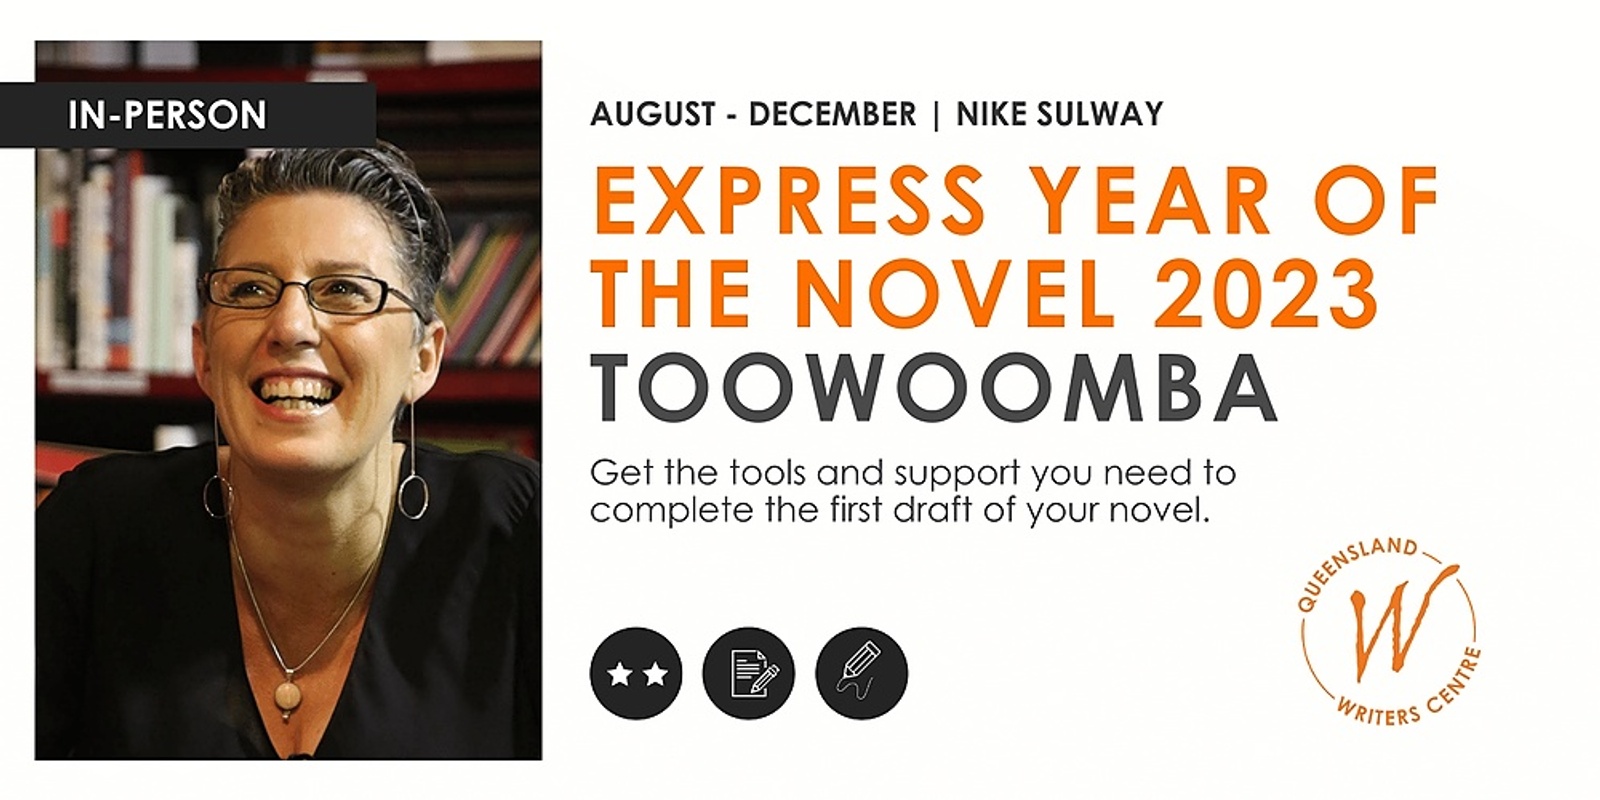 Banner image for Express Year Of The Novel 2023 with Nike Sulway (Toowoomba)